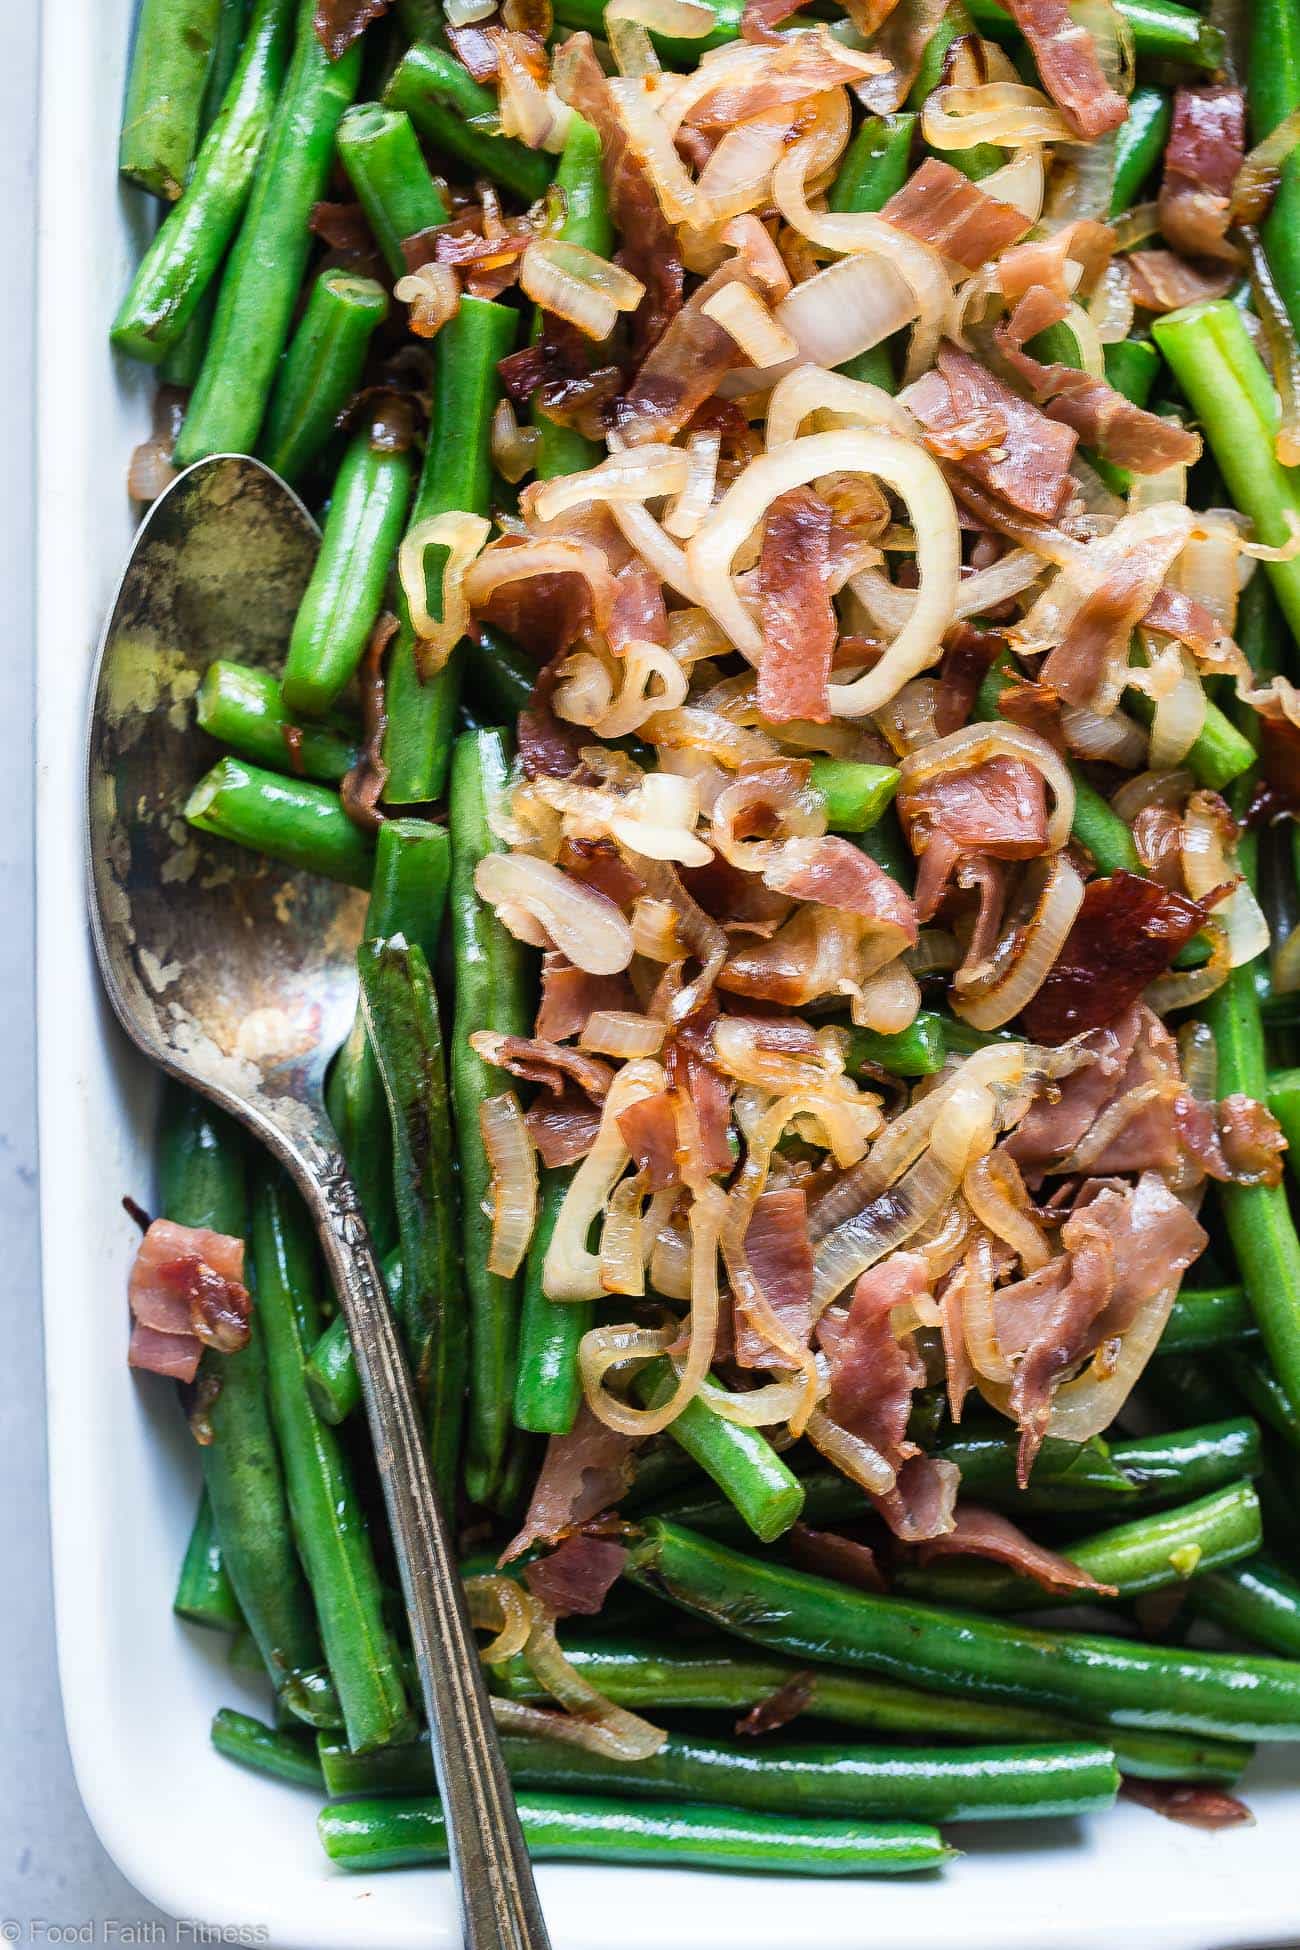 Keto Sauteed Green Beans with Crispy Prosciutto - This easy pan sautéed green beans come together in only 15 minutes! It's only 4 ingredients, paleo friendly and 100 calories! | Foodfaithfitness.com | @FoodFaithFit